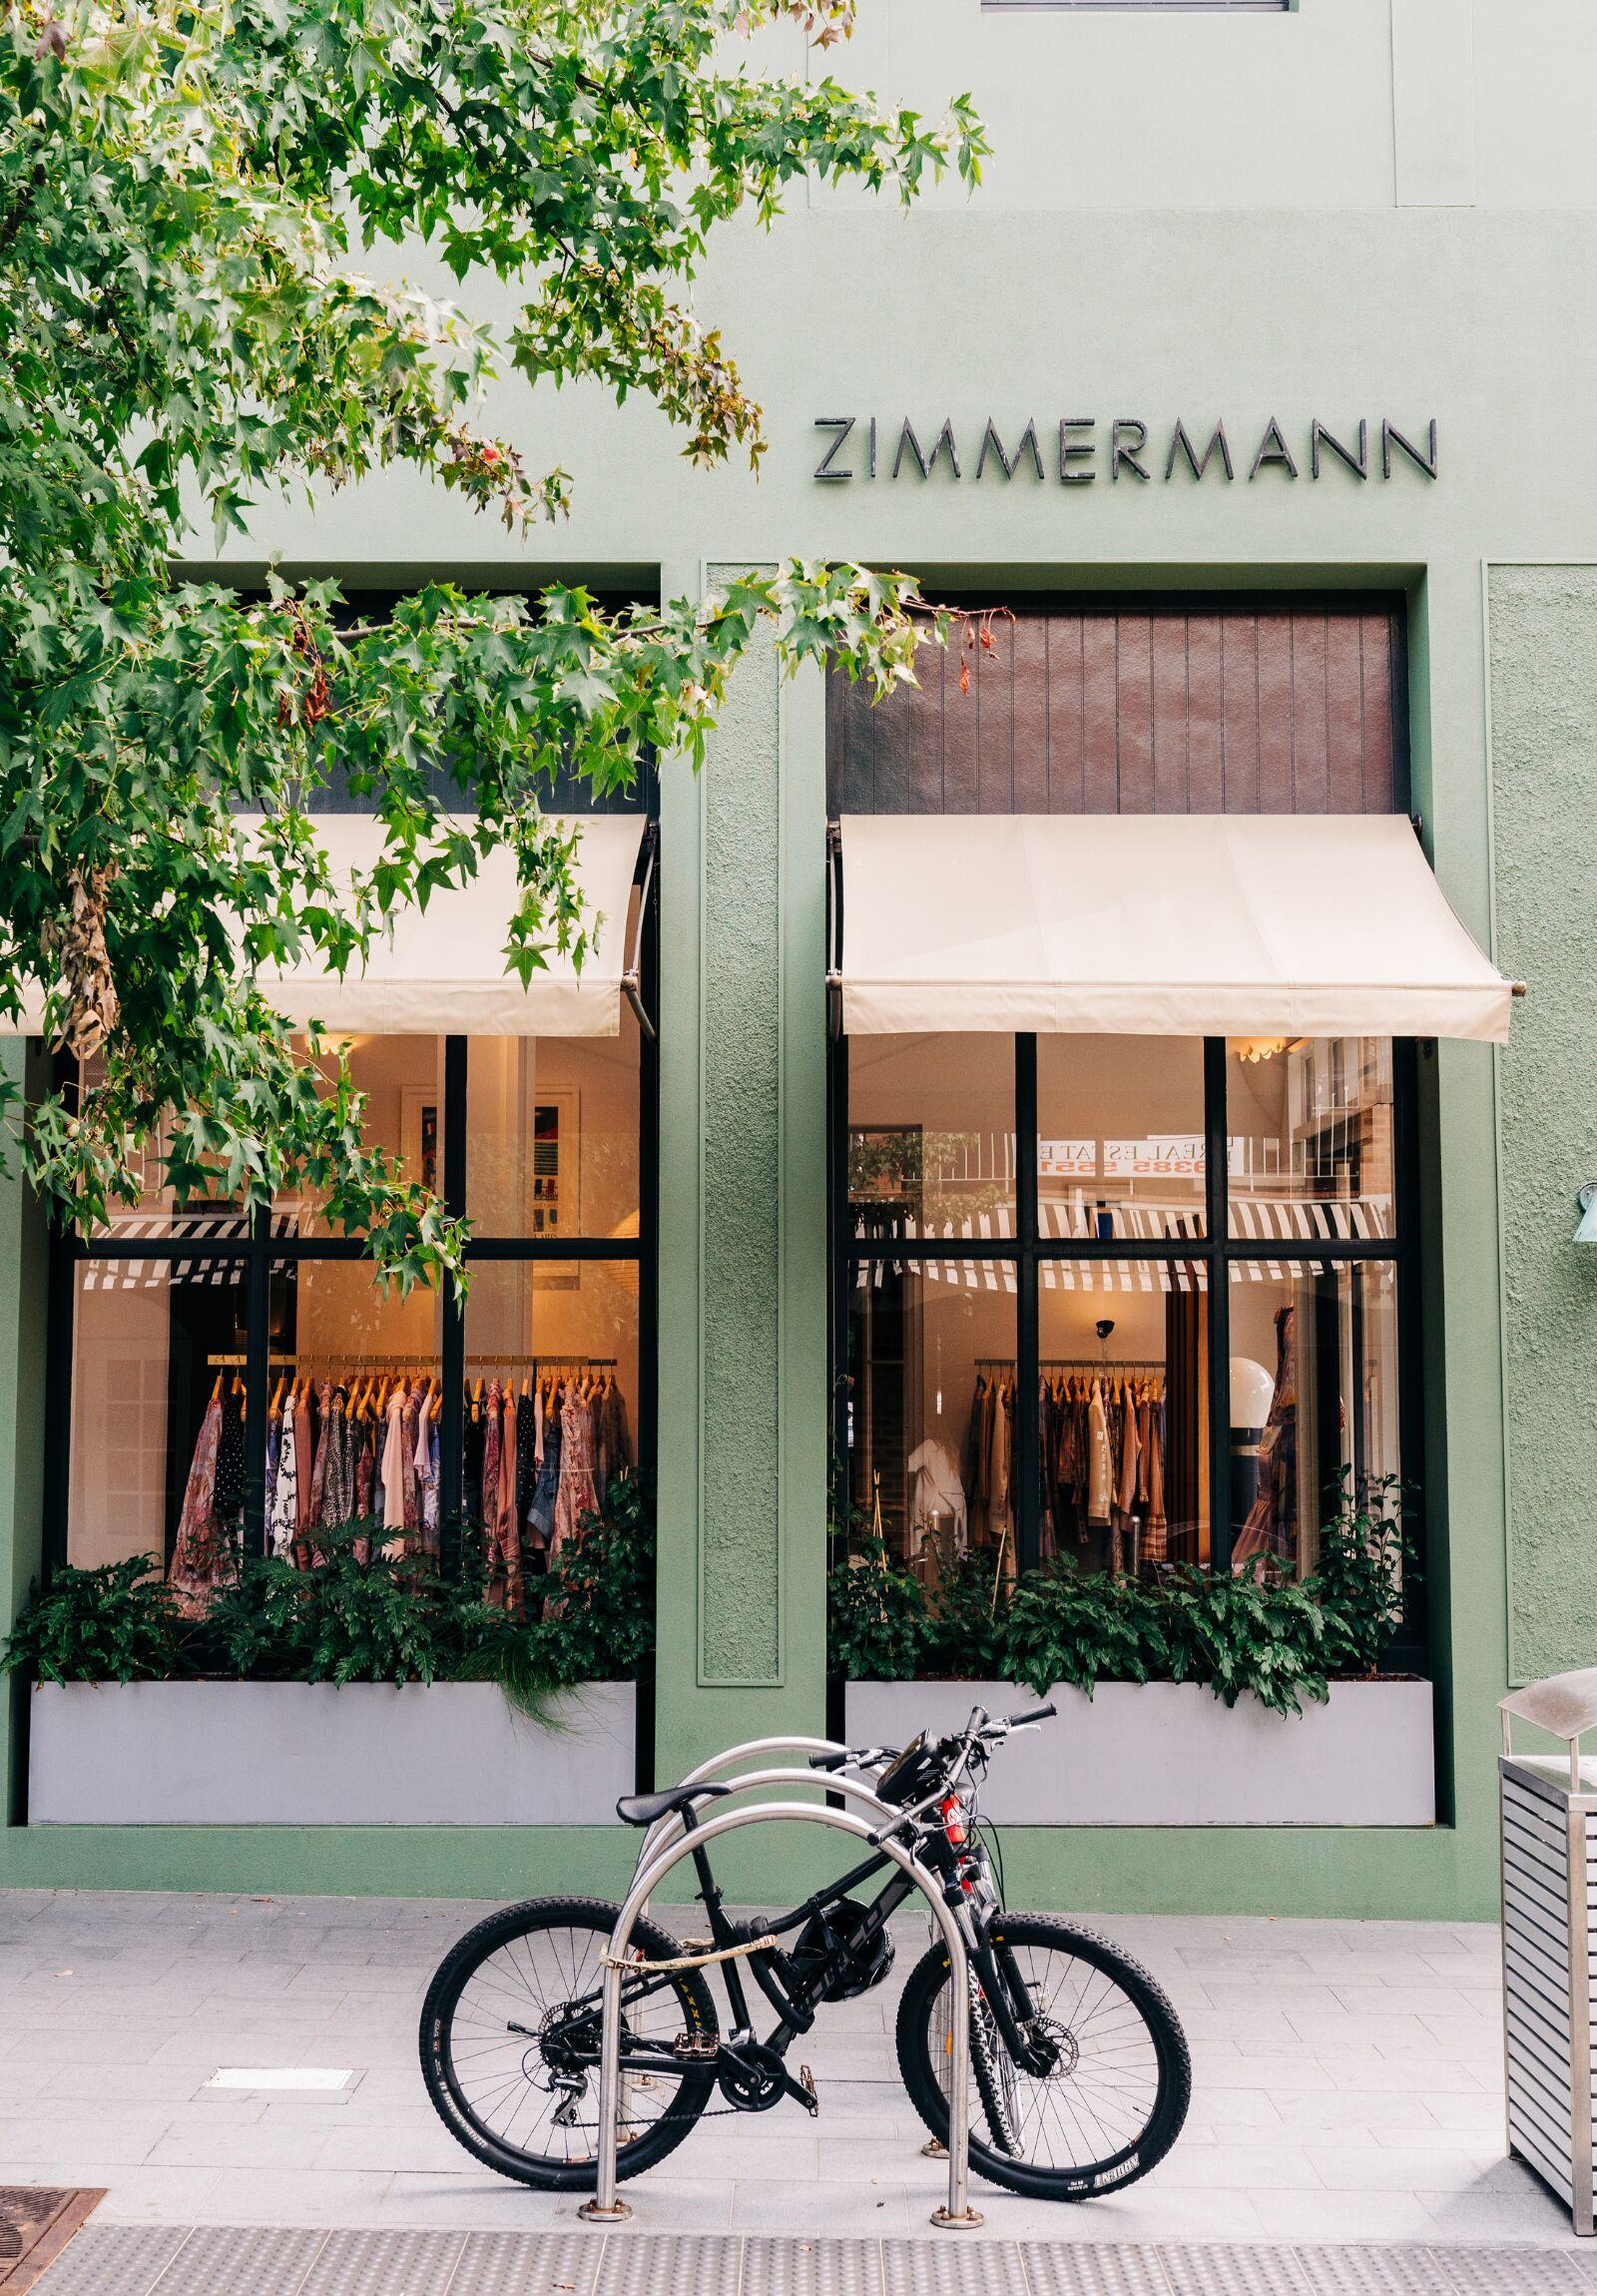 AT THE EPICENTRE OF THIS NEIGHBOURHOOD LOCALE LIES CLAREMONT QUARTER, A HUB OF LUXURY AND STYLE.